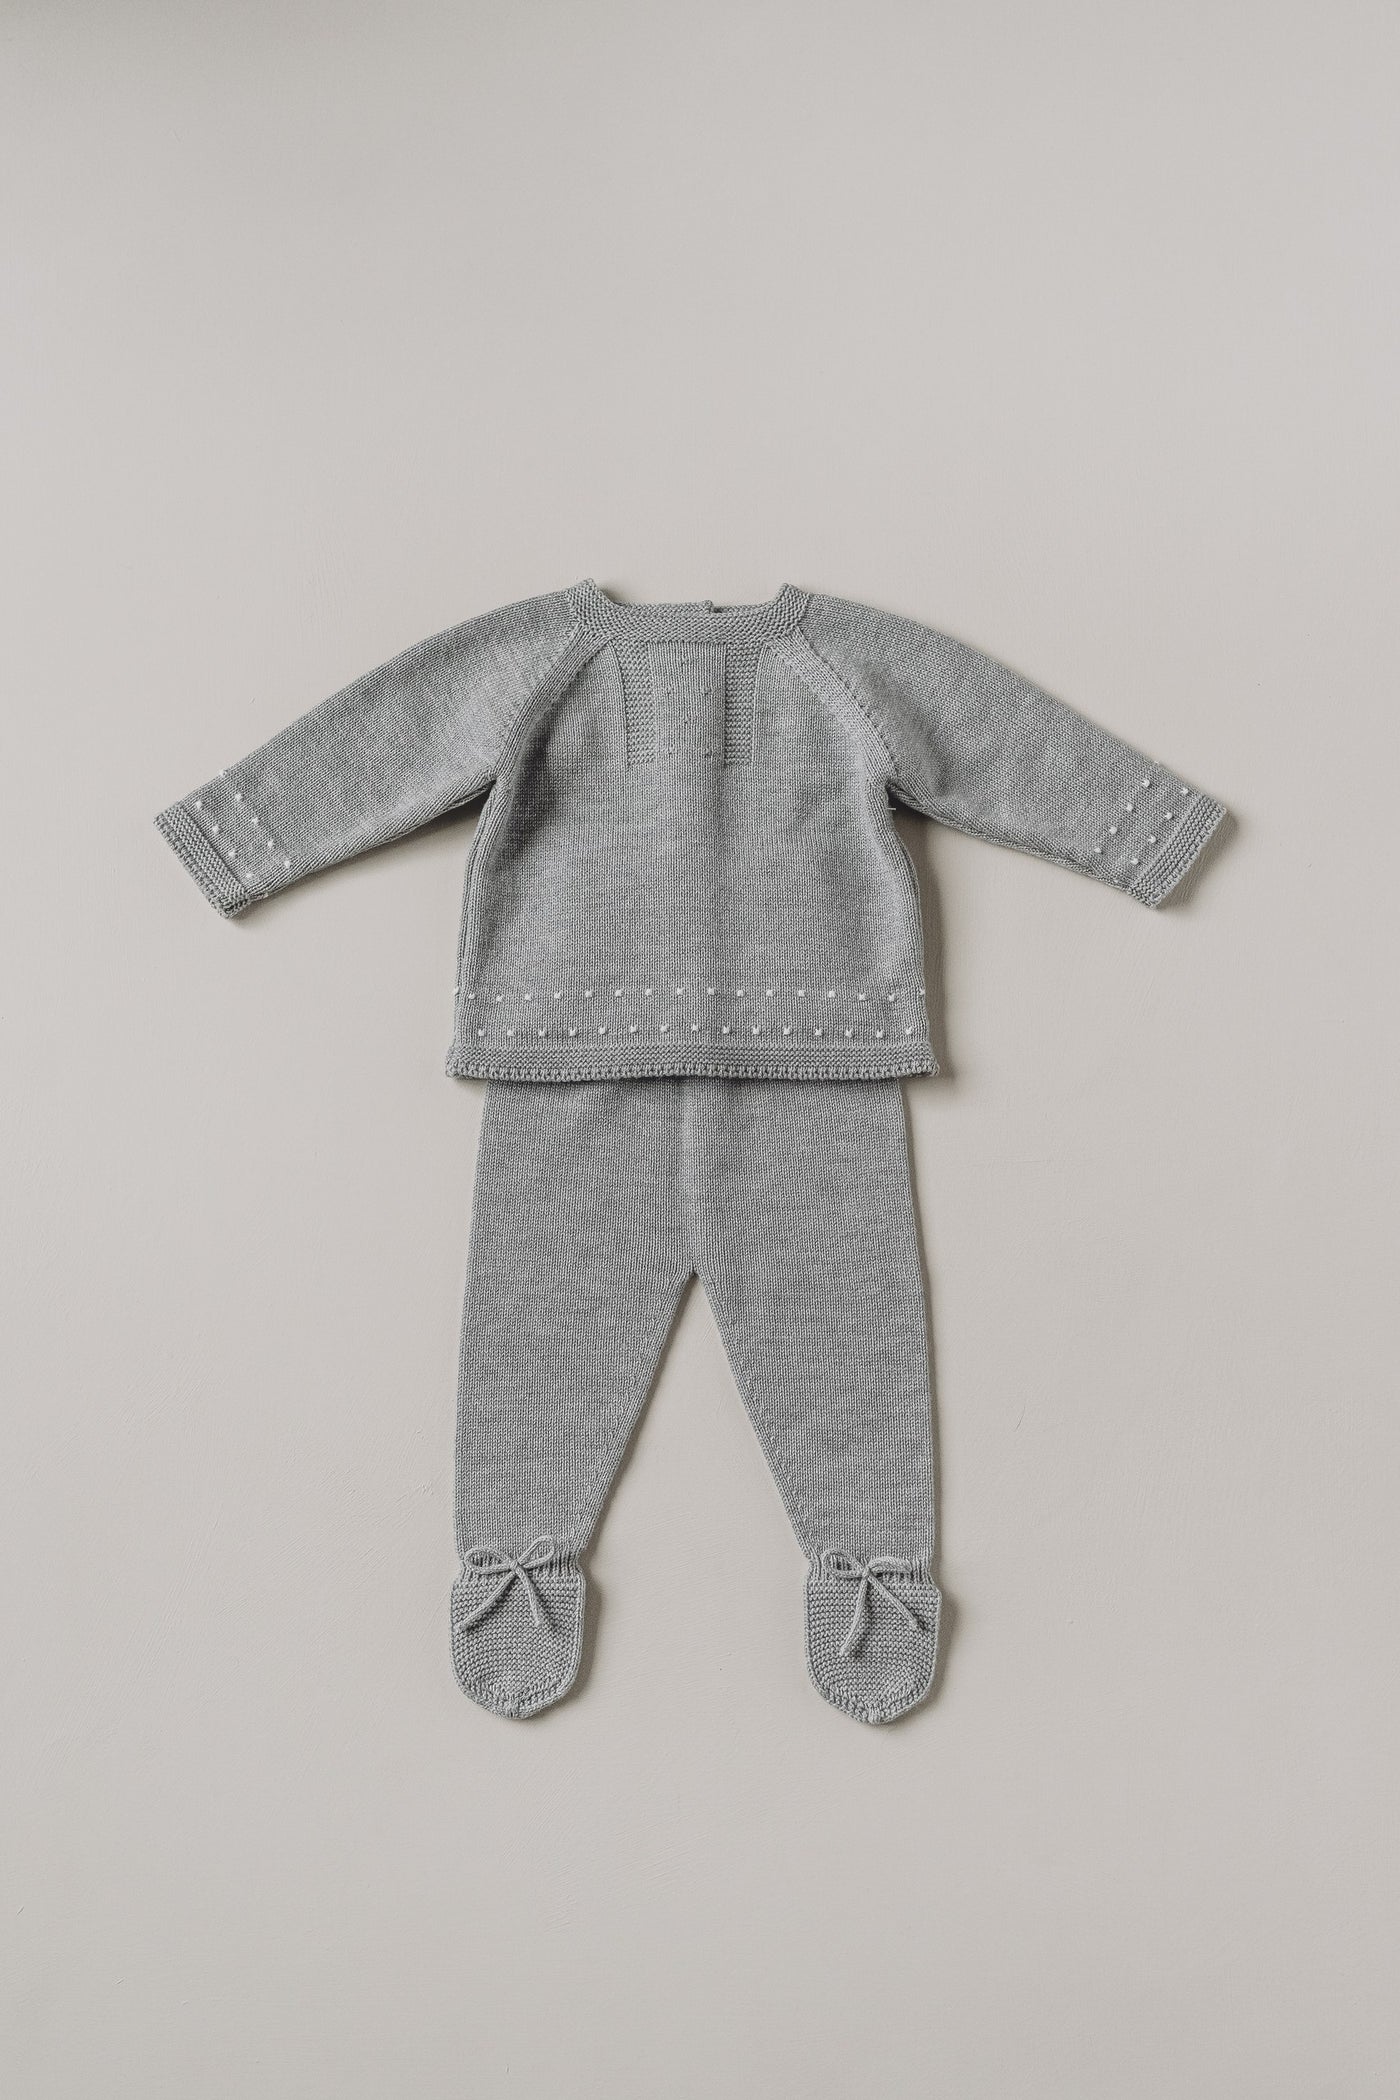 Knitted Light Gray Baby's 2-piece Set